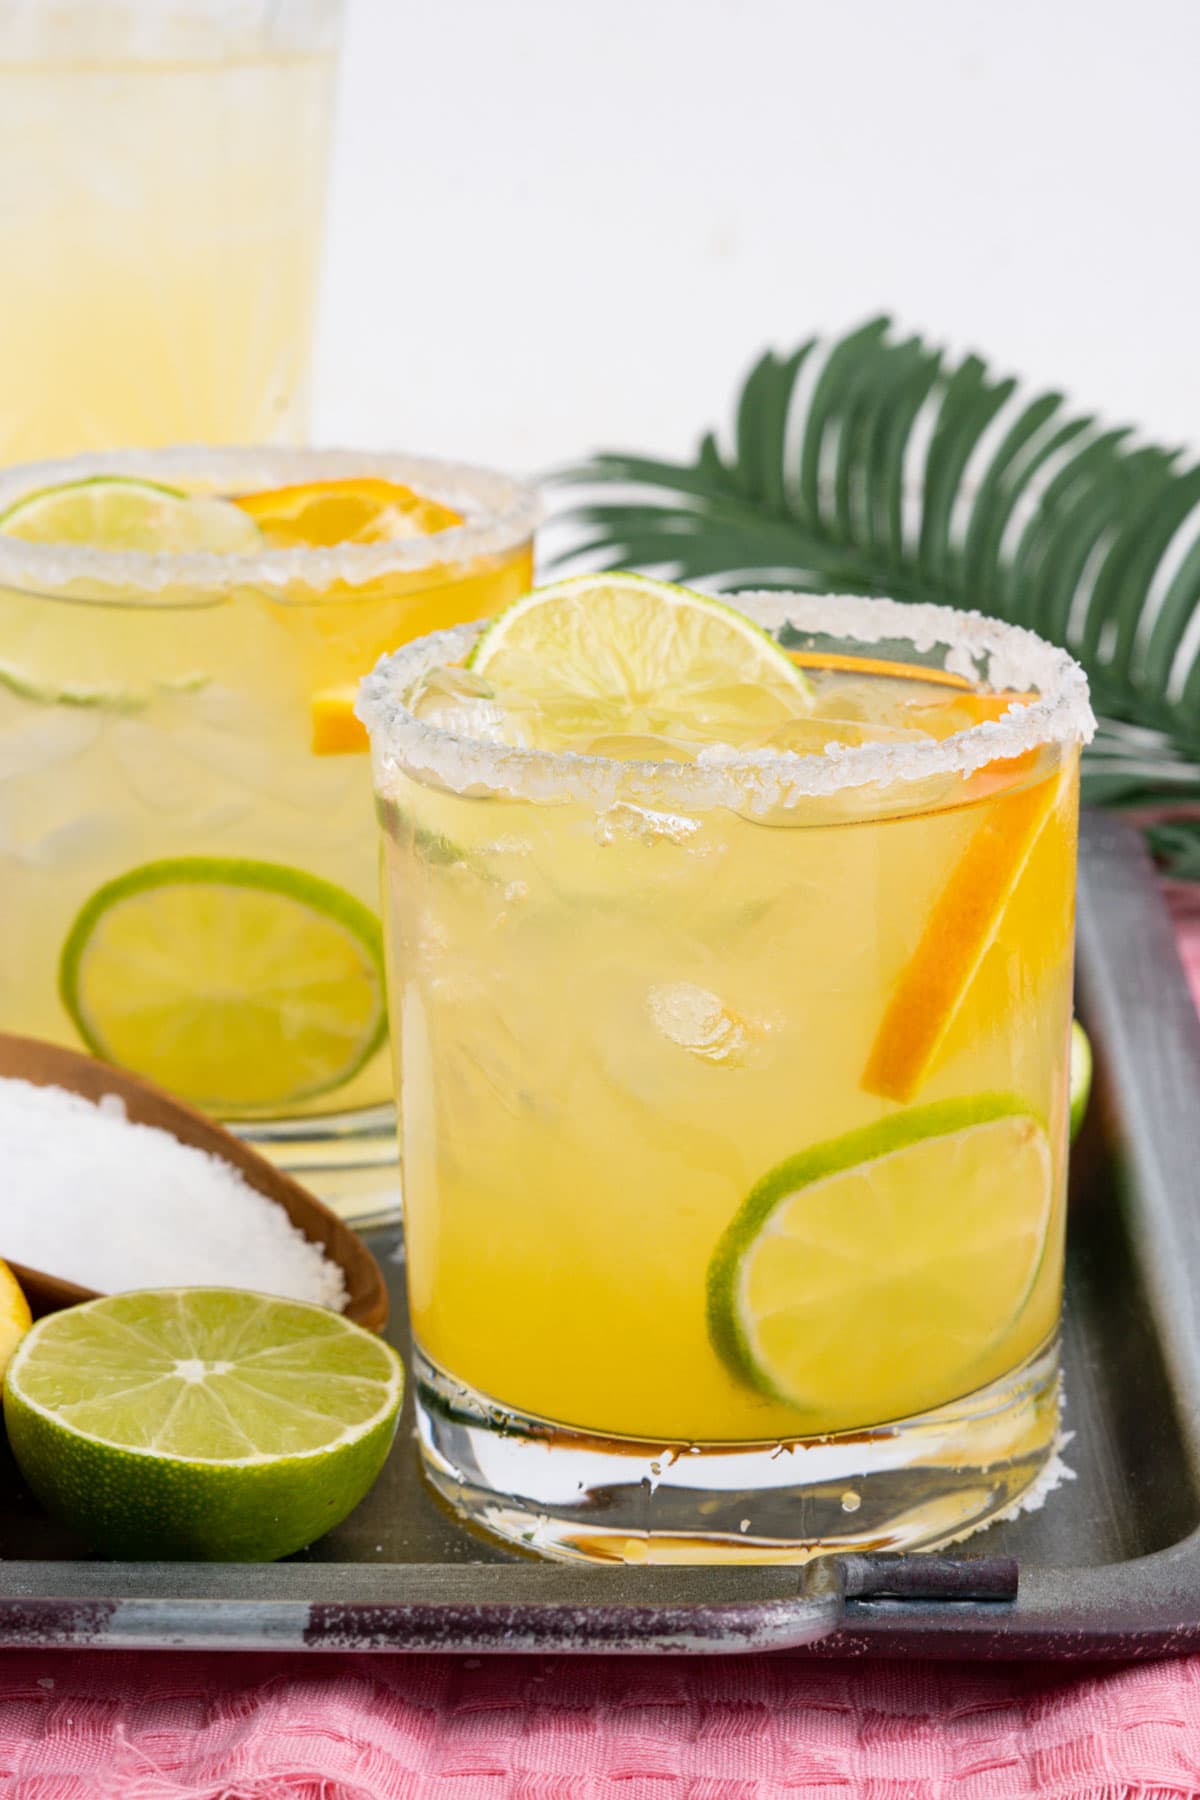 Margaritas in glasses with ice, limes and orange slices.